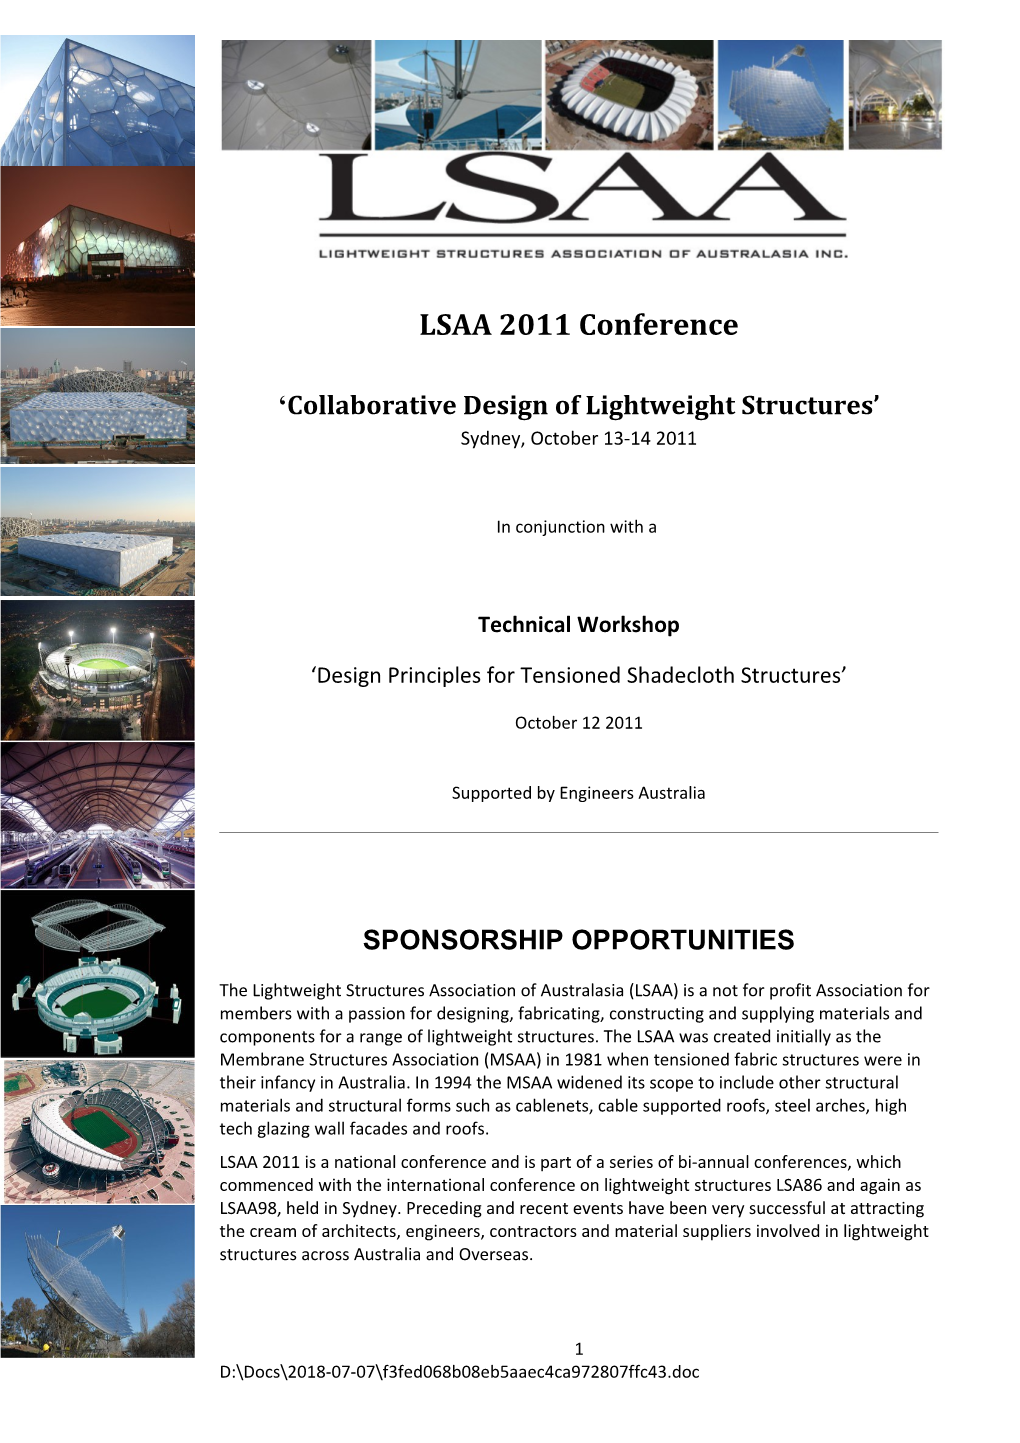 Collaborative Design of Lightweight Structures